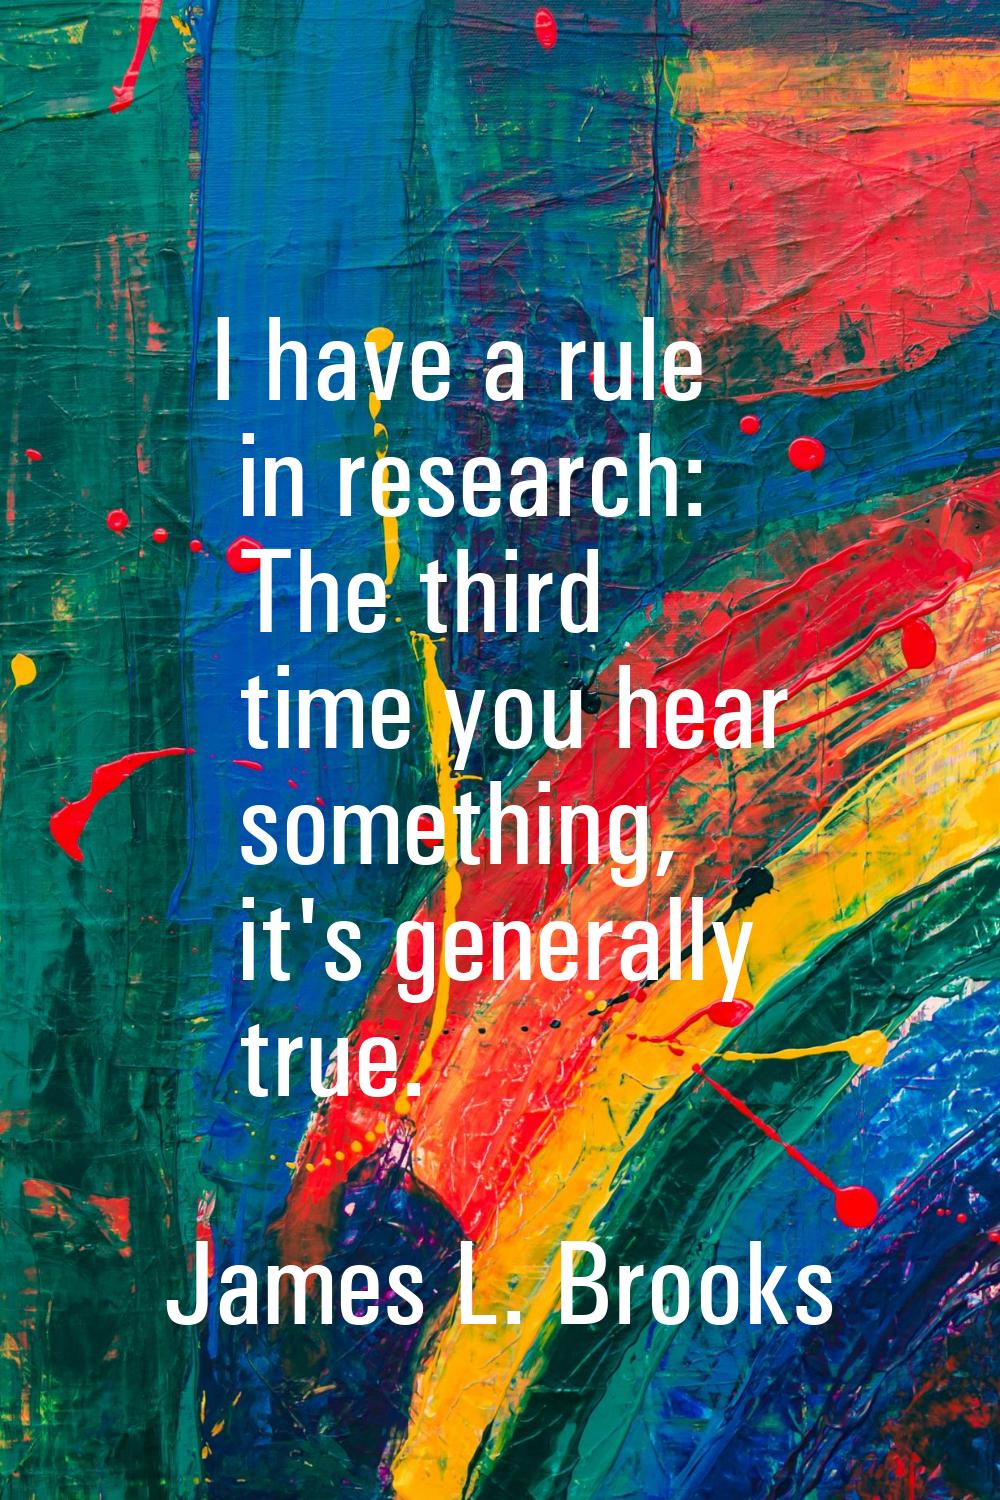 I have a rule in research: The third time you hear something, it's generally true.